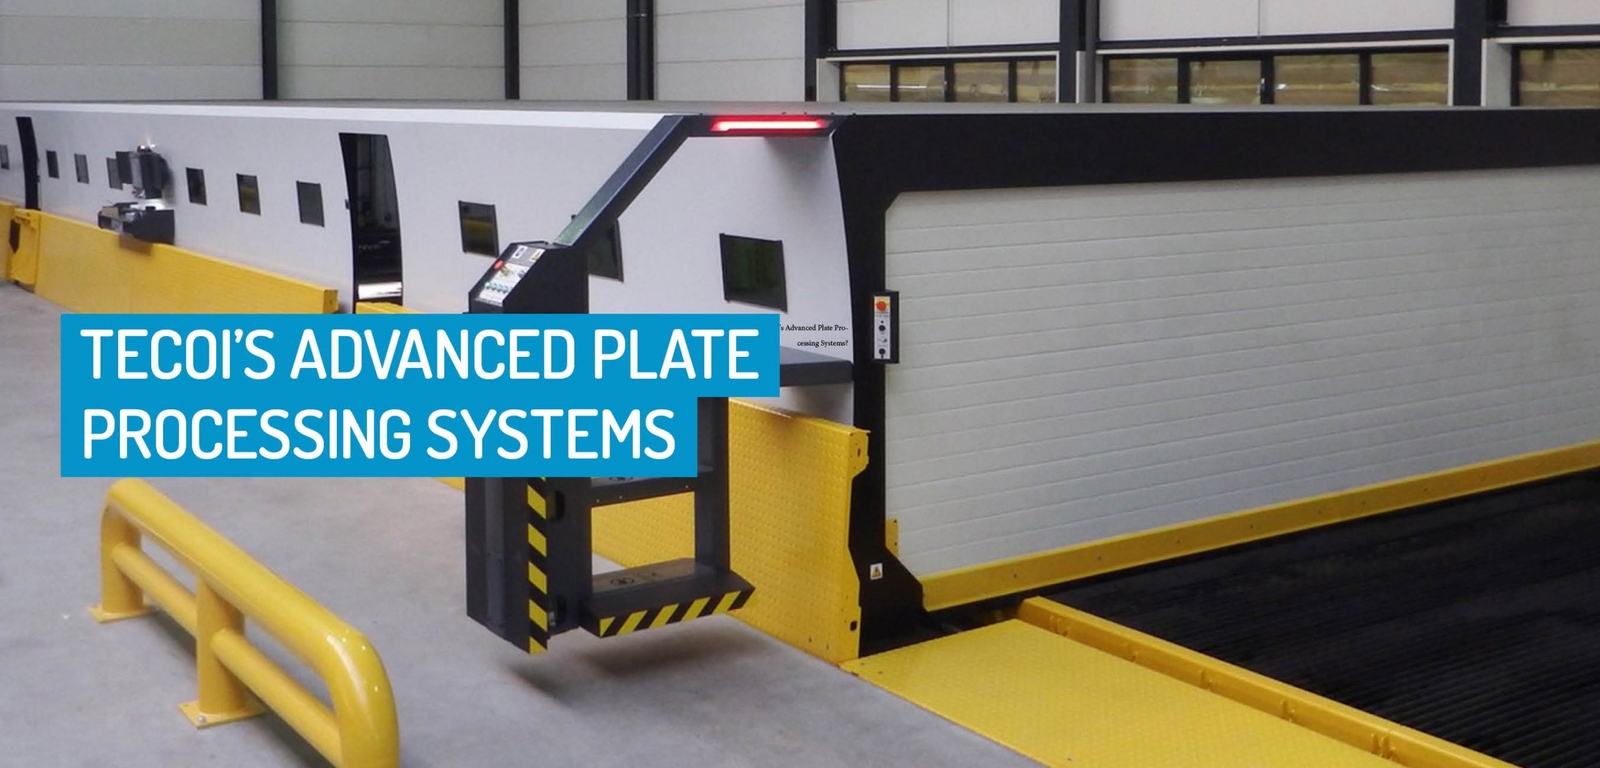 Oi! Have you seen Tecoi’s Advanced Plate Processing Systems?